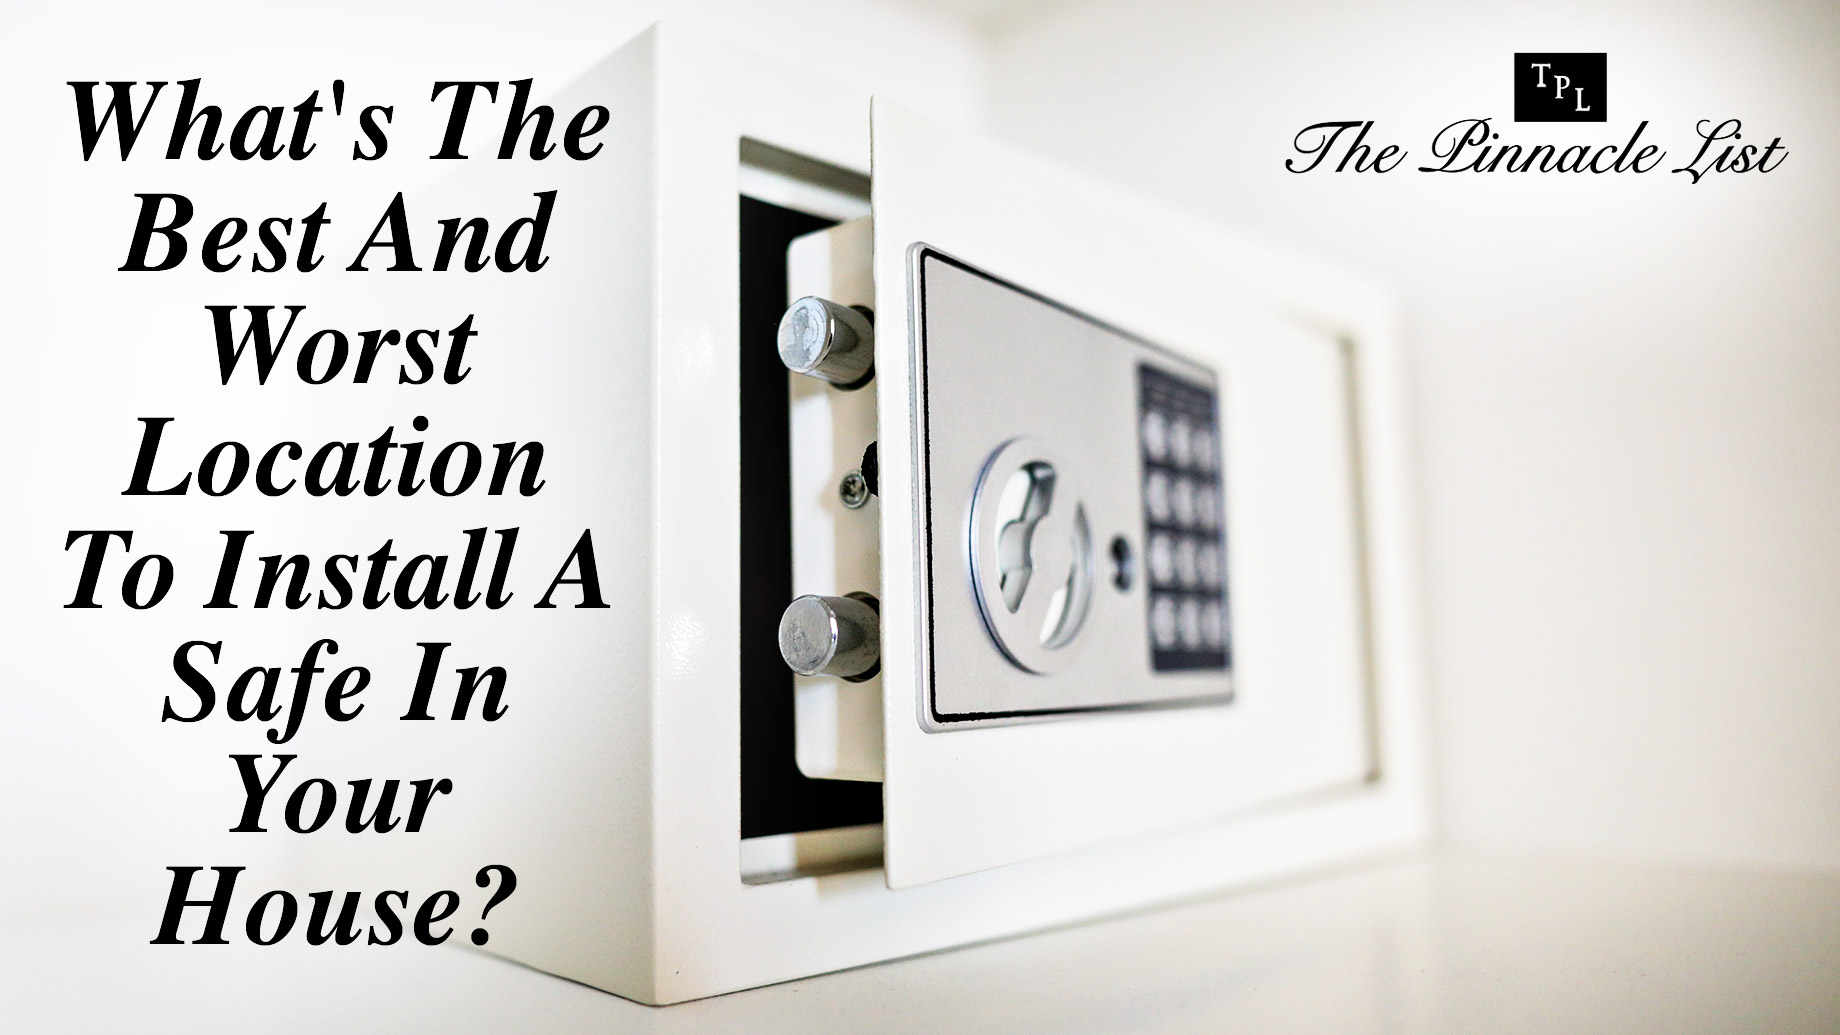 What's The Best And Worst Location To Install A Safe In Your House?